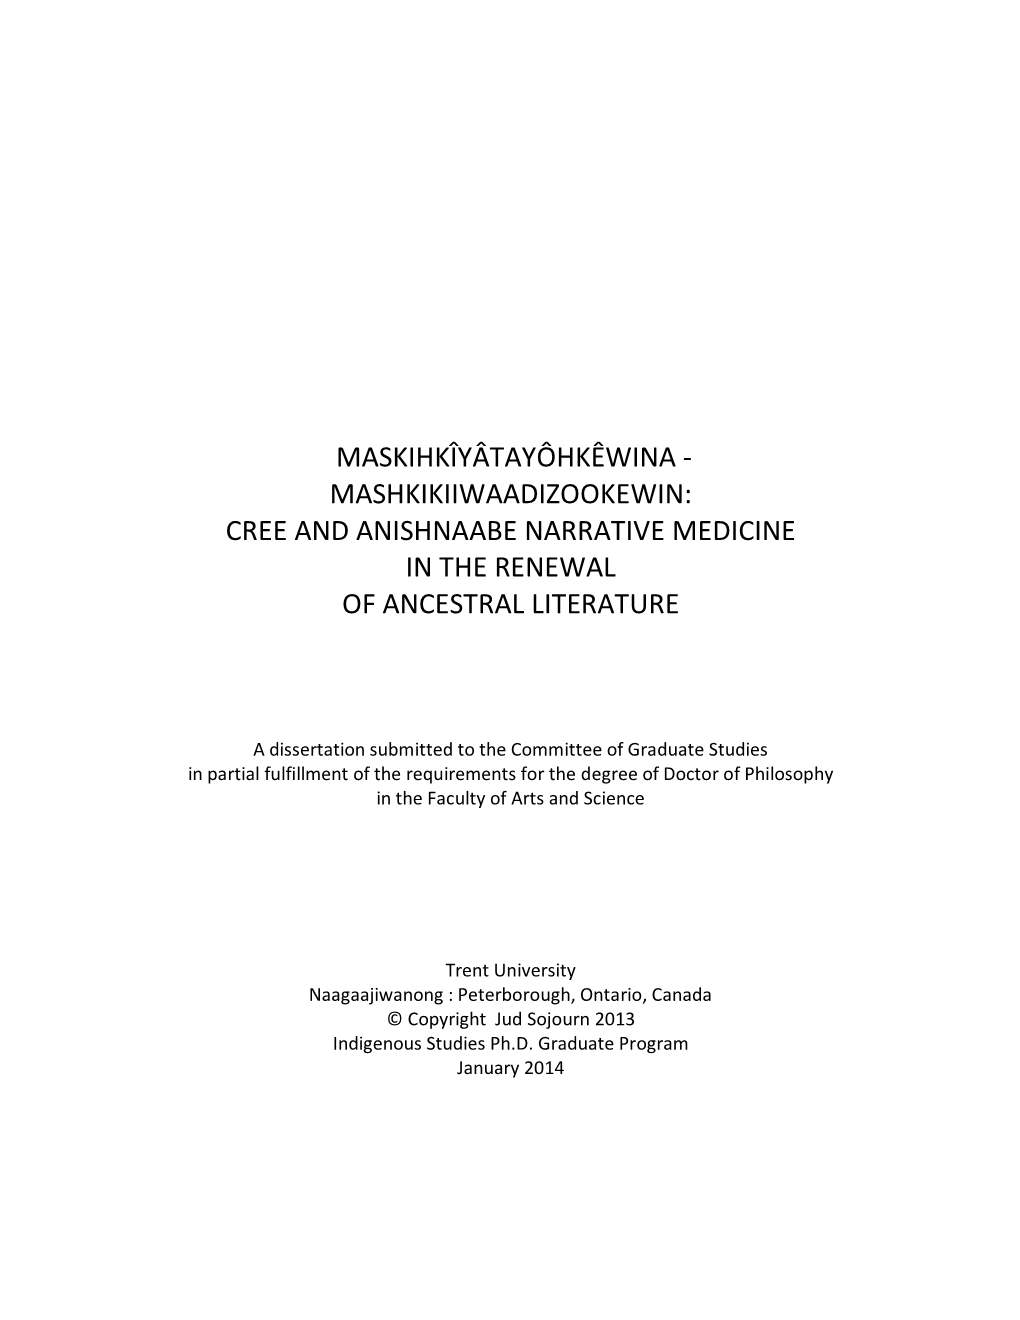 Cree and Anishnaabe Narrative Medicine in the Renewal of Ancestral Literature